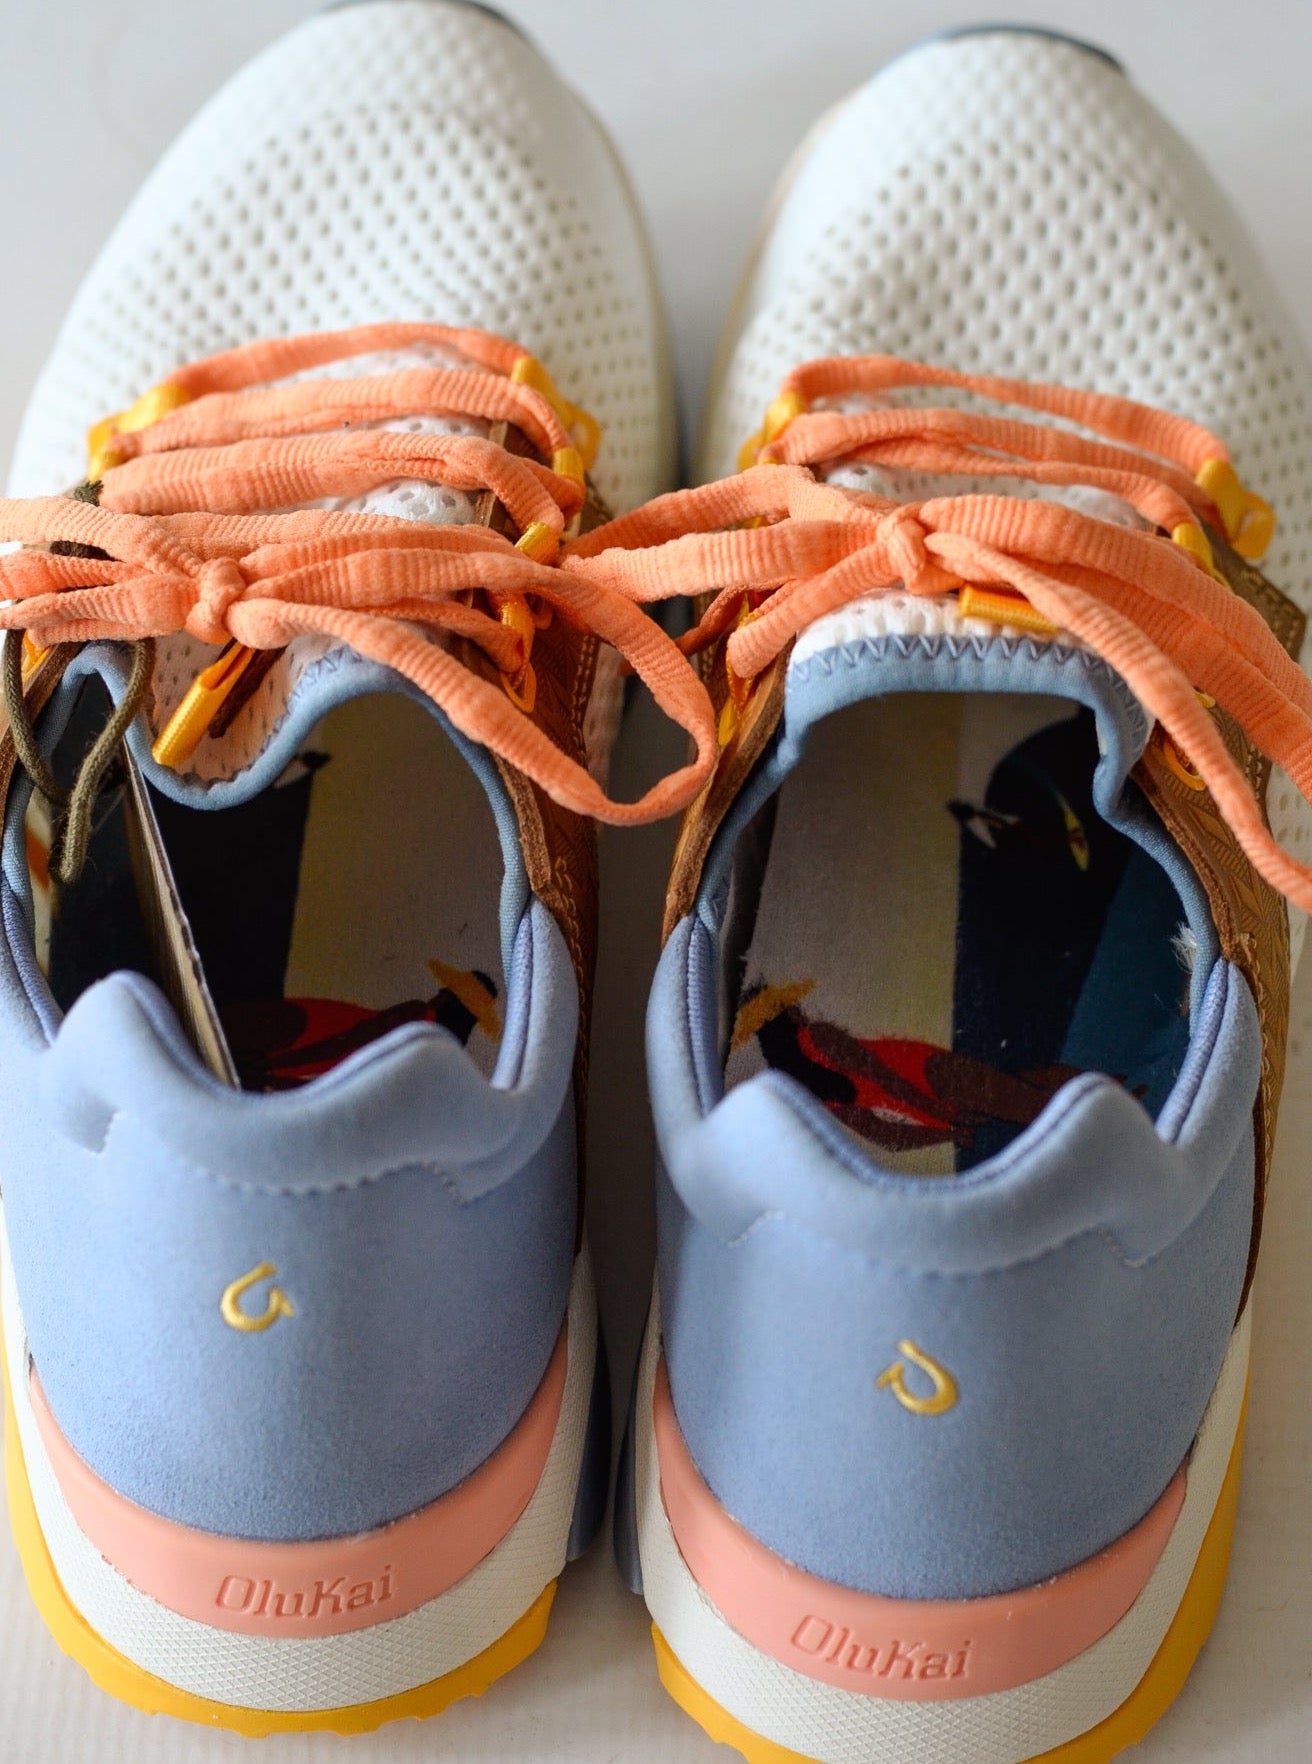 A white fashion sneaker with peachy orange laces, brown leather details, a light blue suede back, and colorful rubber bottoms.